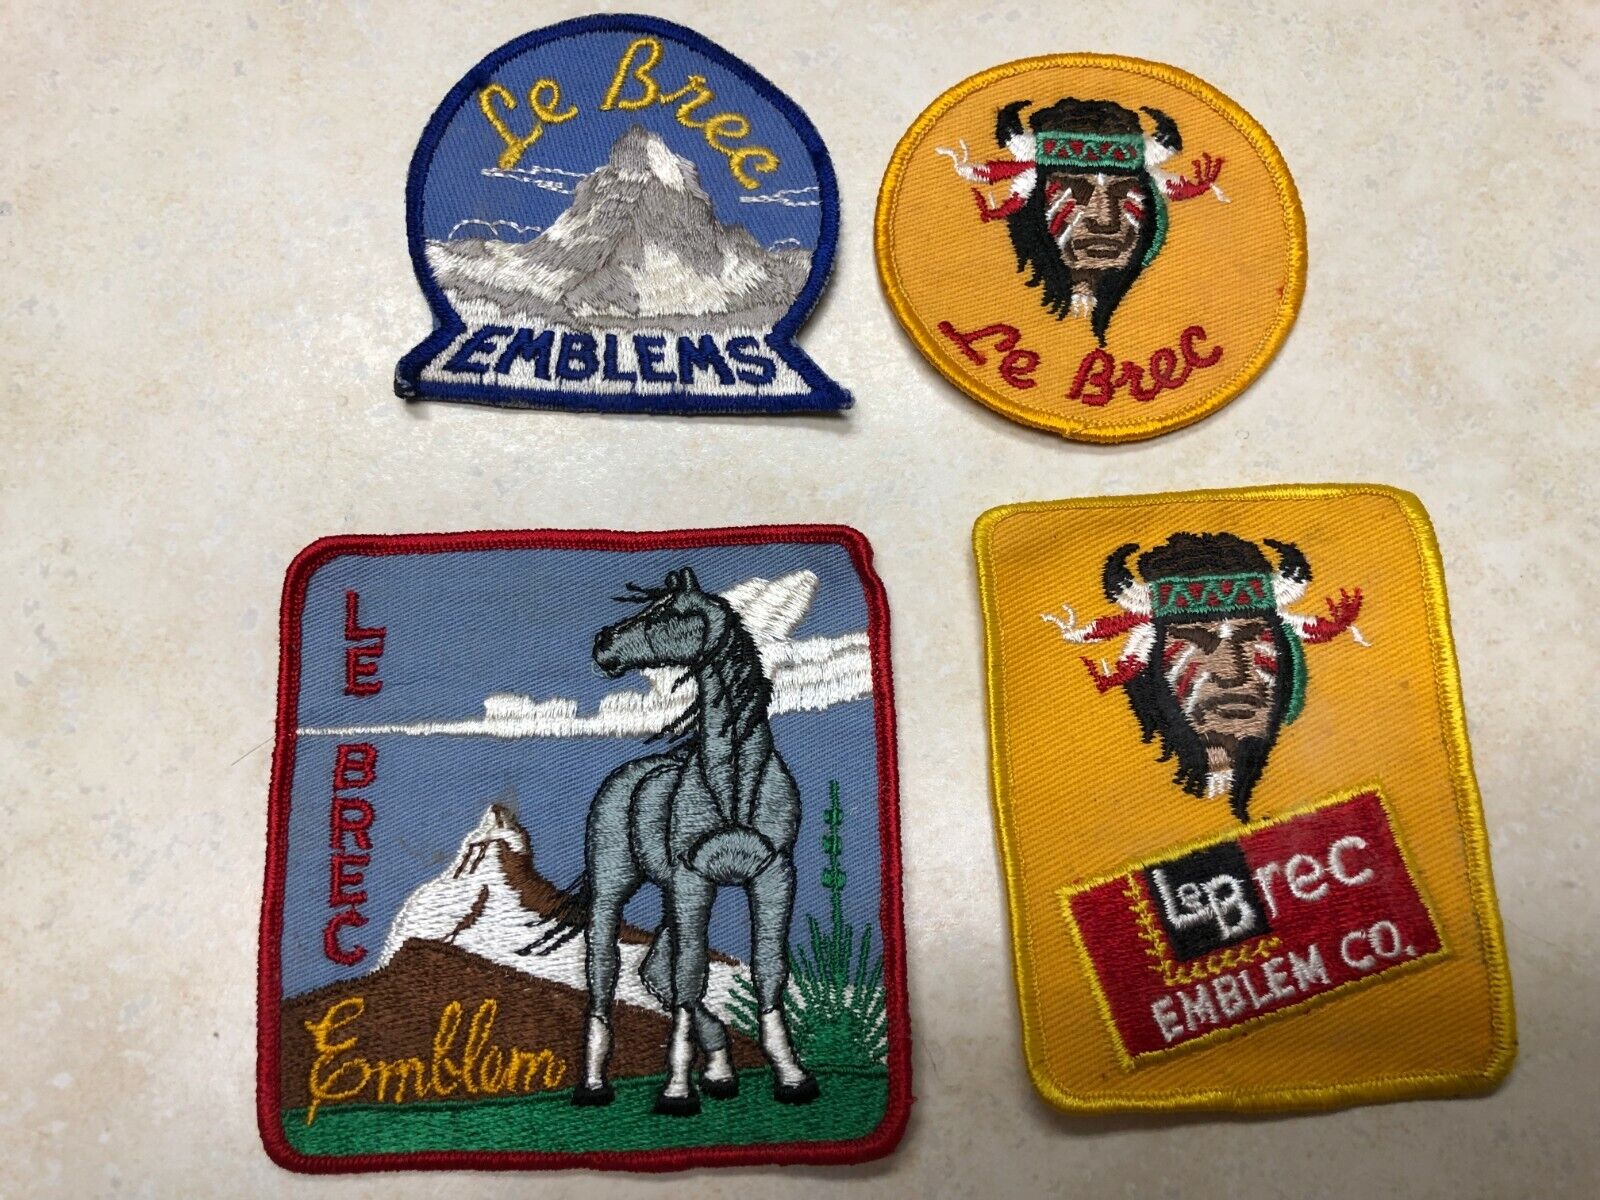 Lot of 4 Le Brec Emblem Patch Company Advertising Patches